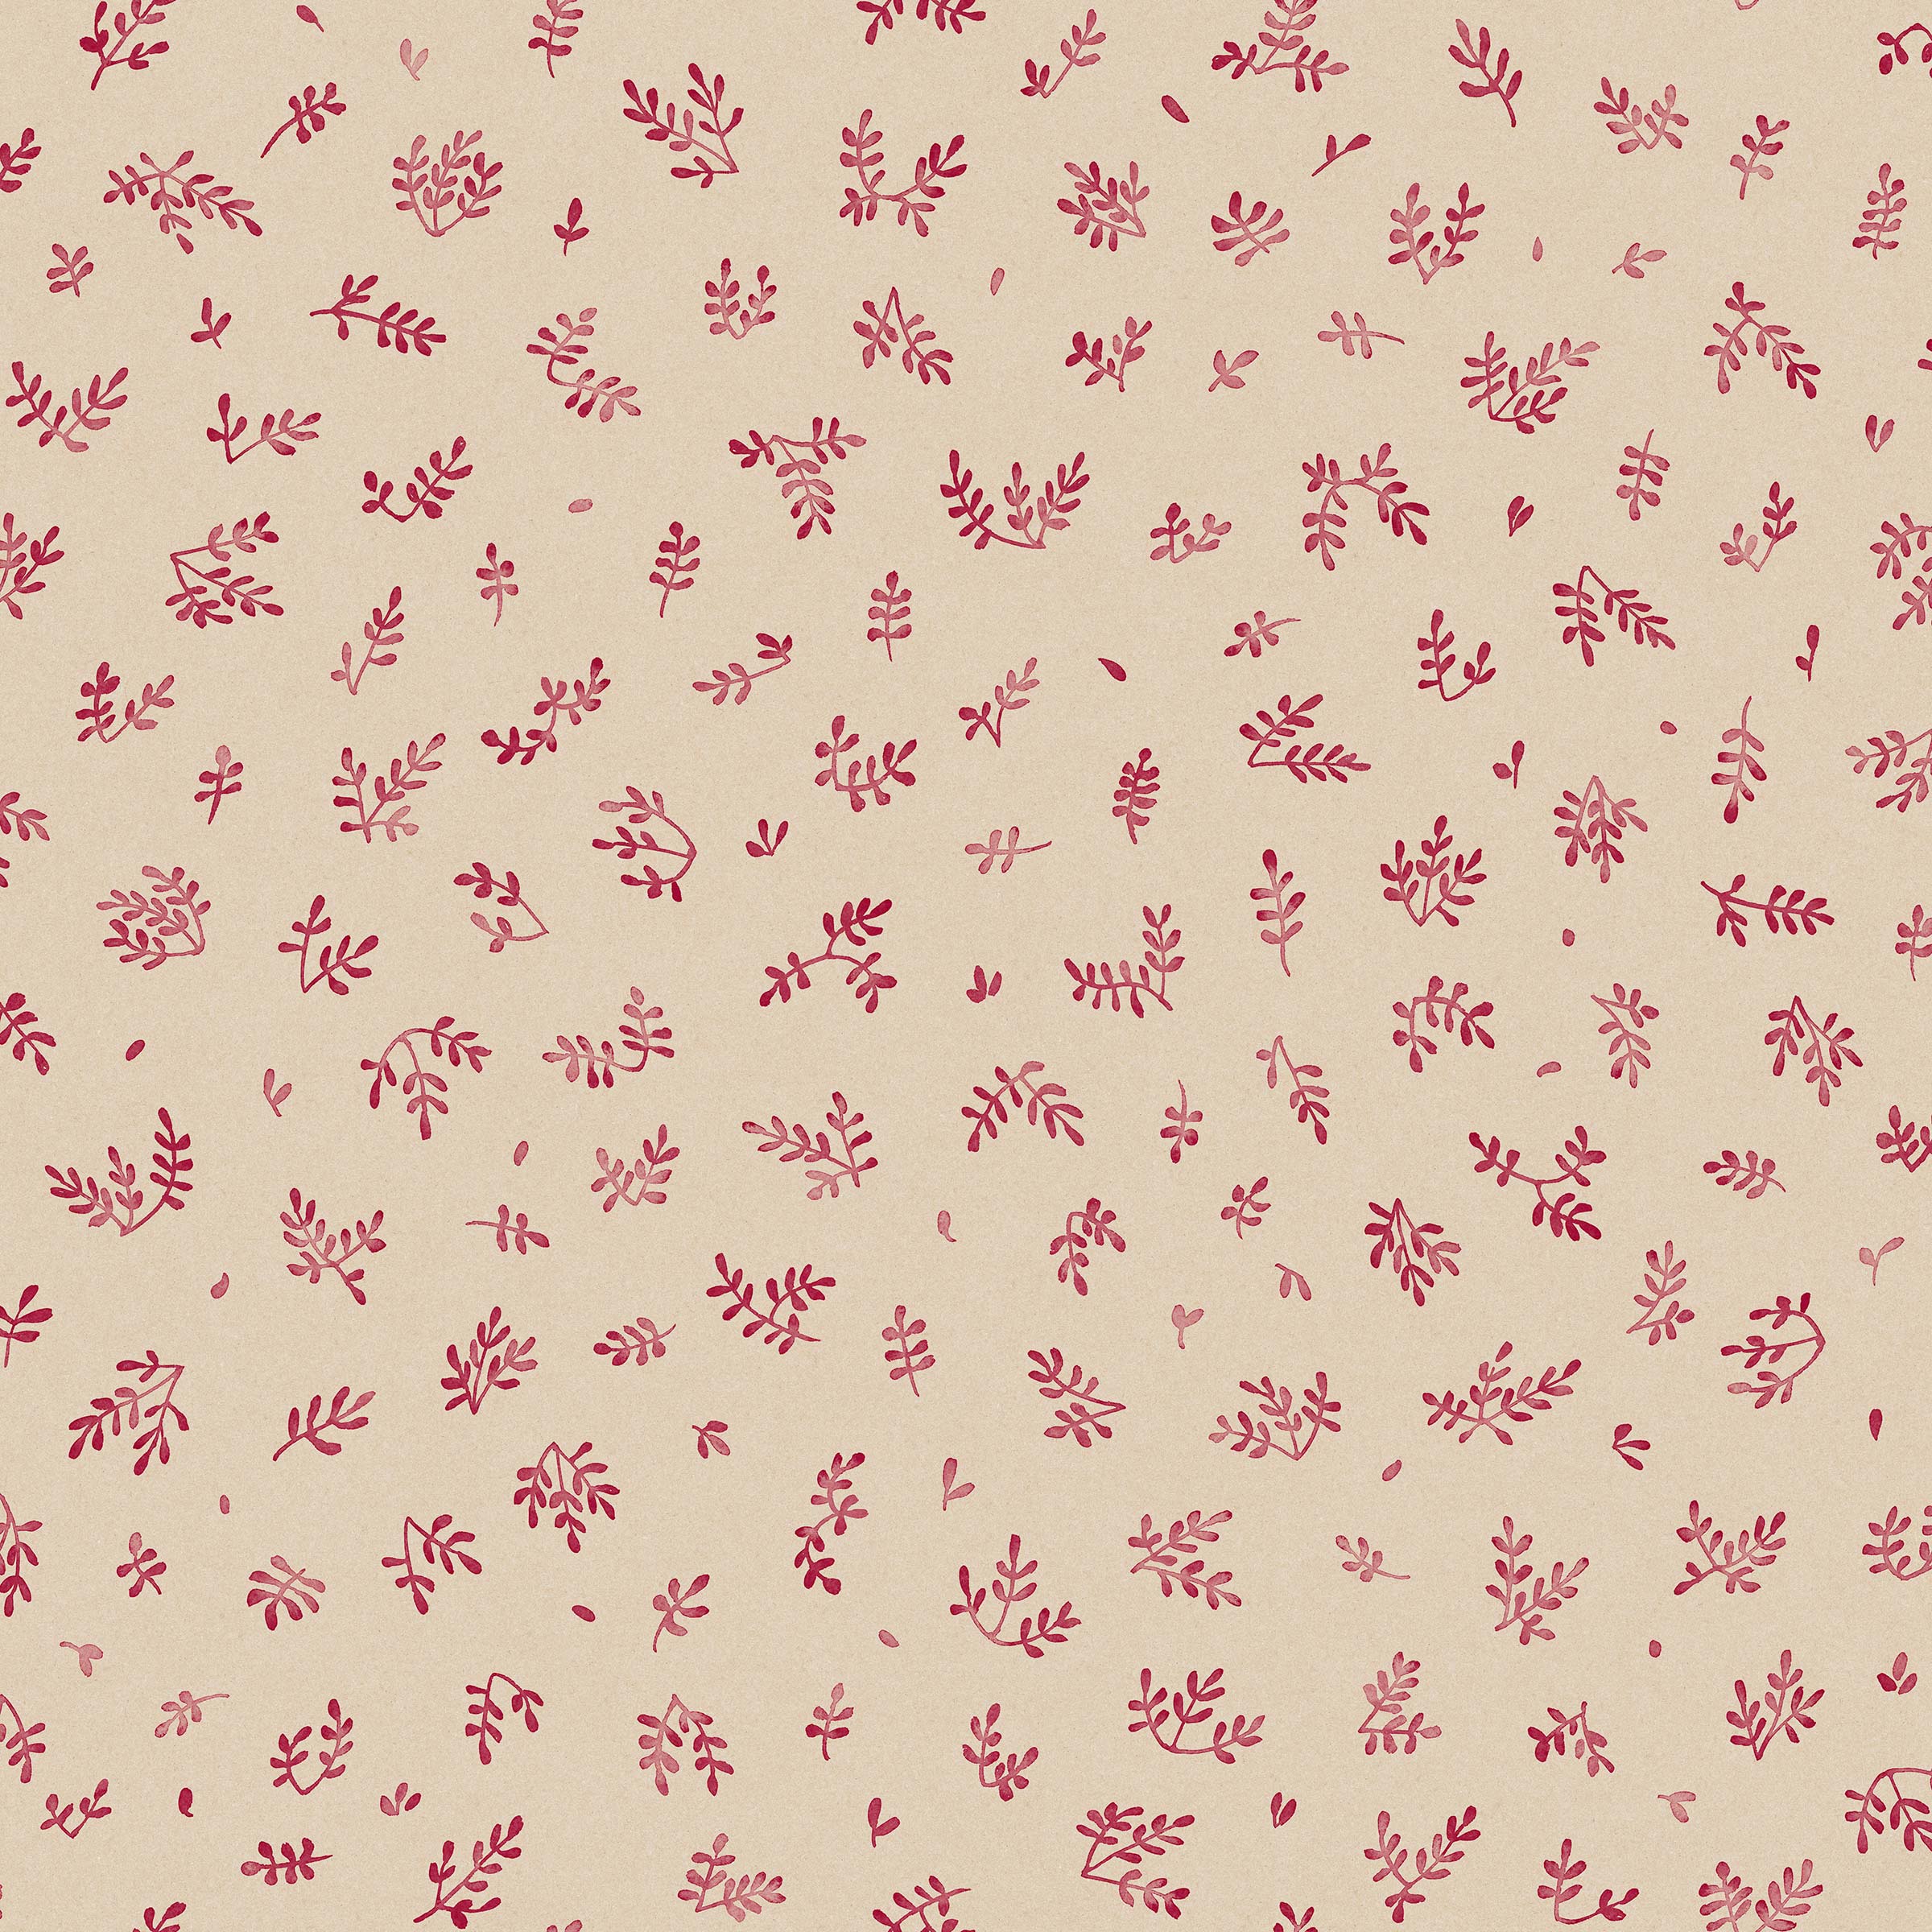 Detail of wallpaper in a minimal repeating leaf print in pink on a tan field.